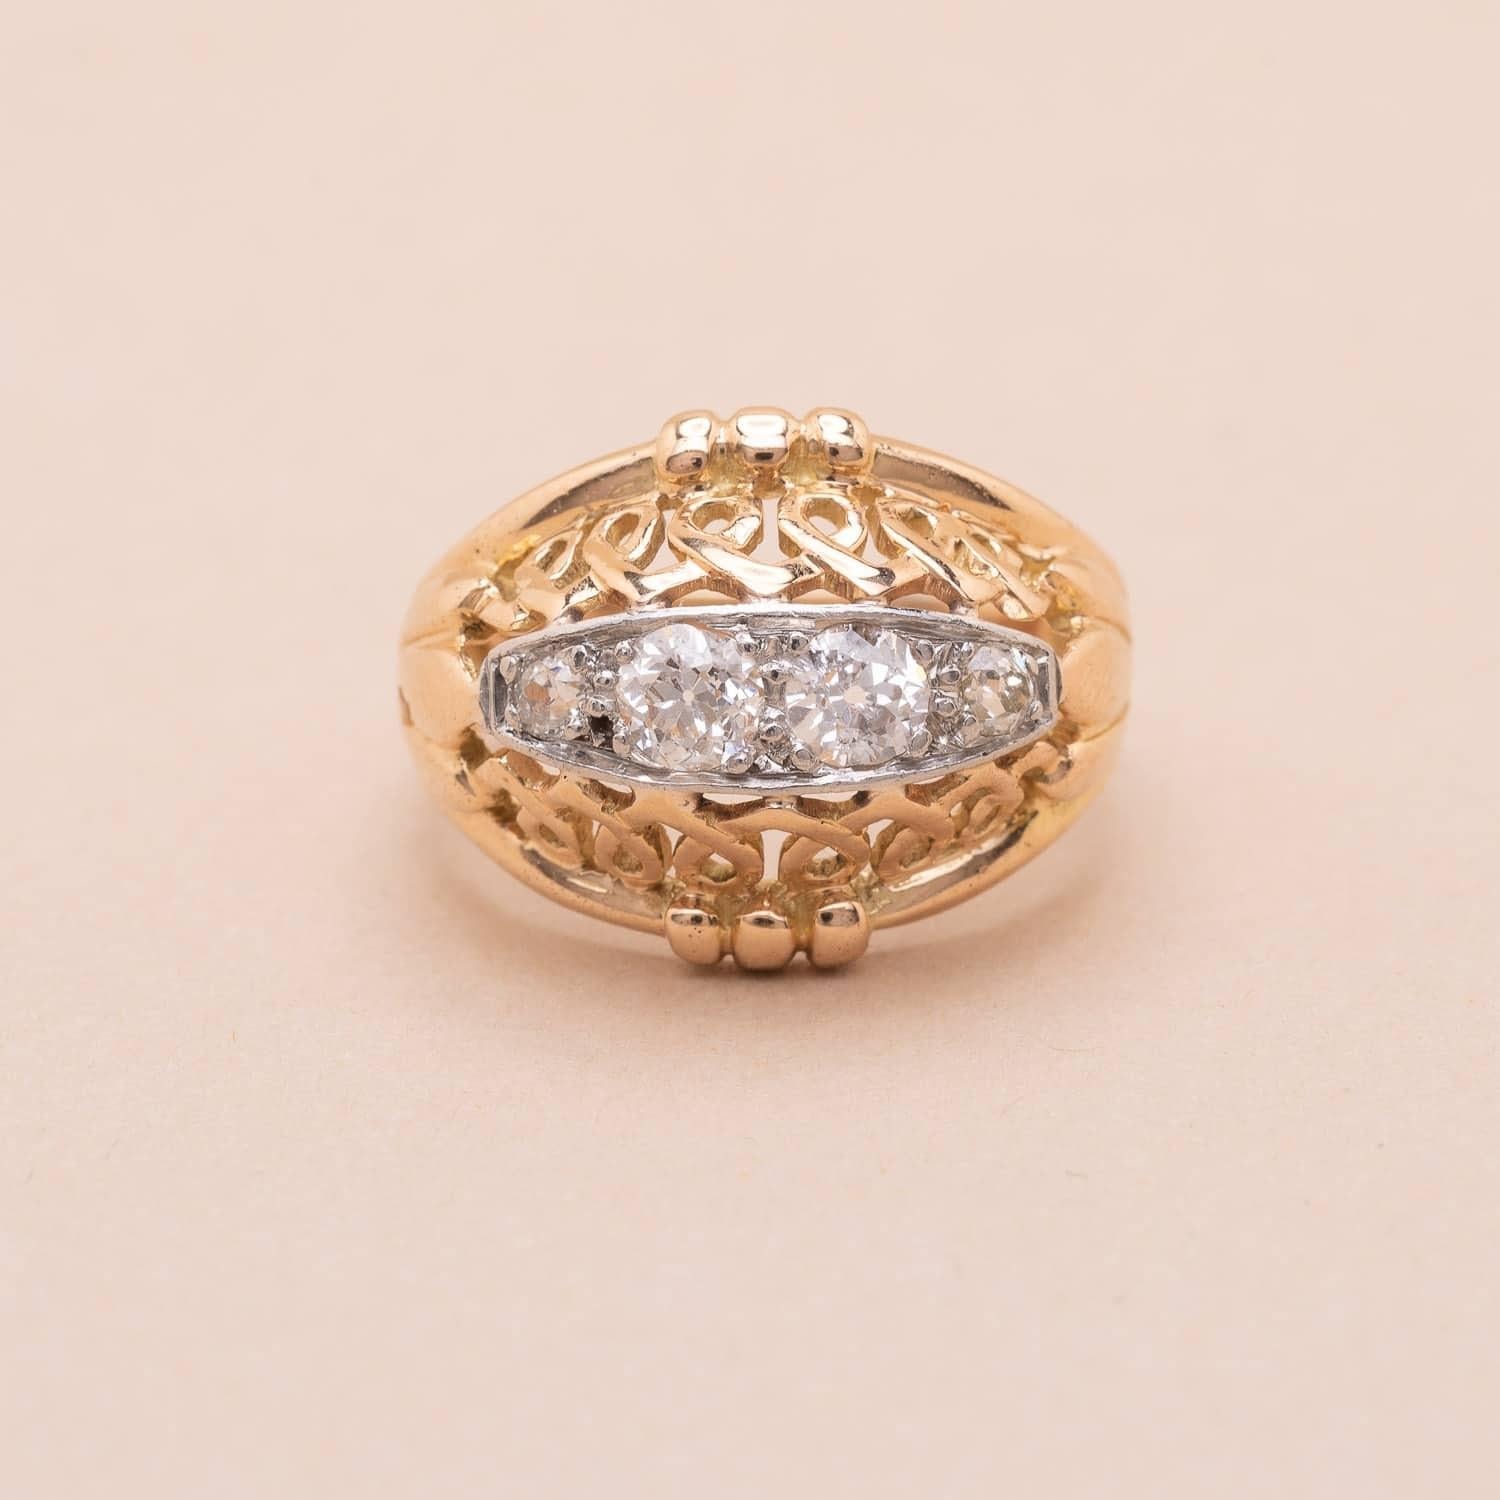 Vintage 18K (750°/00) gold and platinum (950°/00) set with 3 round old-cut diamonds. This gorgeous ring is jarretière inspired, a classic and elegant shape typical of the 40s French jewelry. 

Total diamond weight : 0.40 carats

Color : IJ / Purity